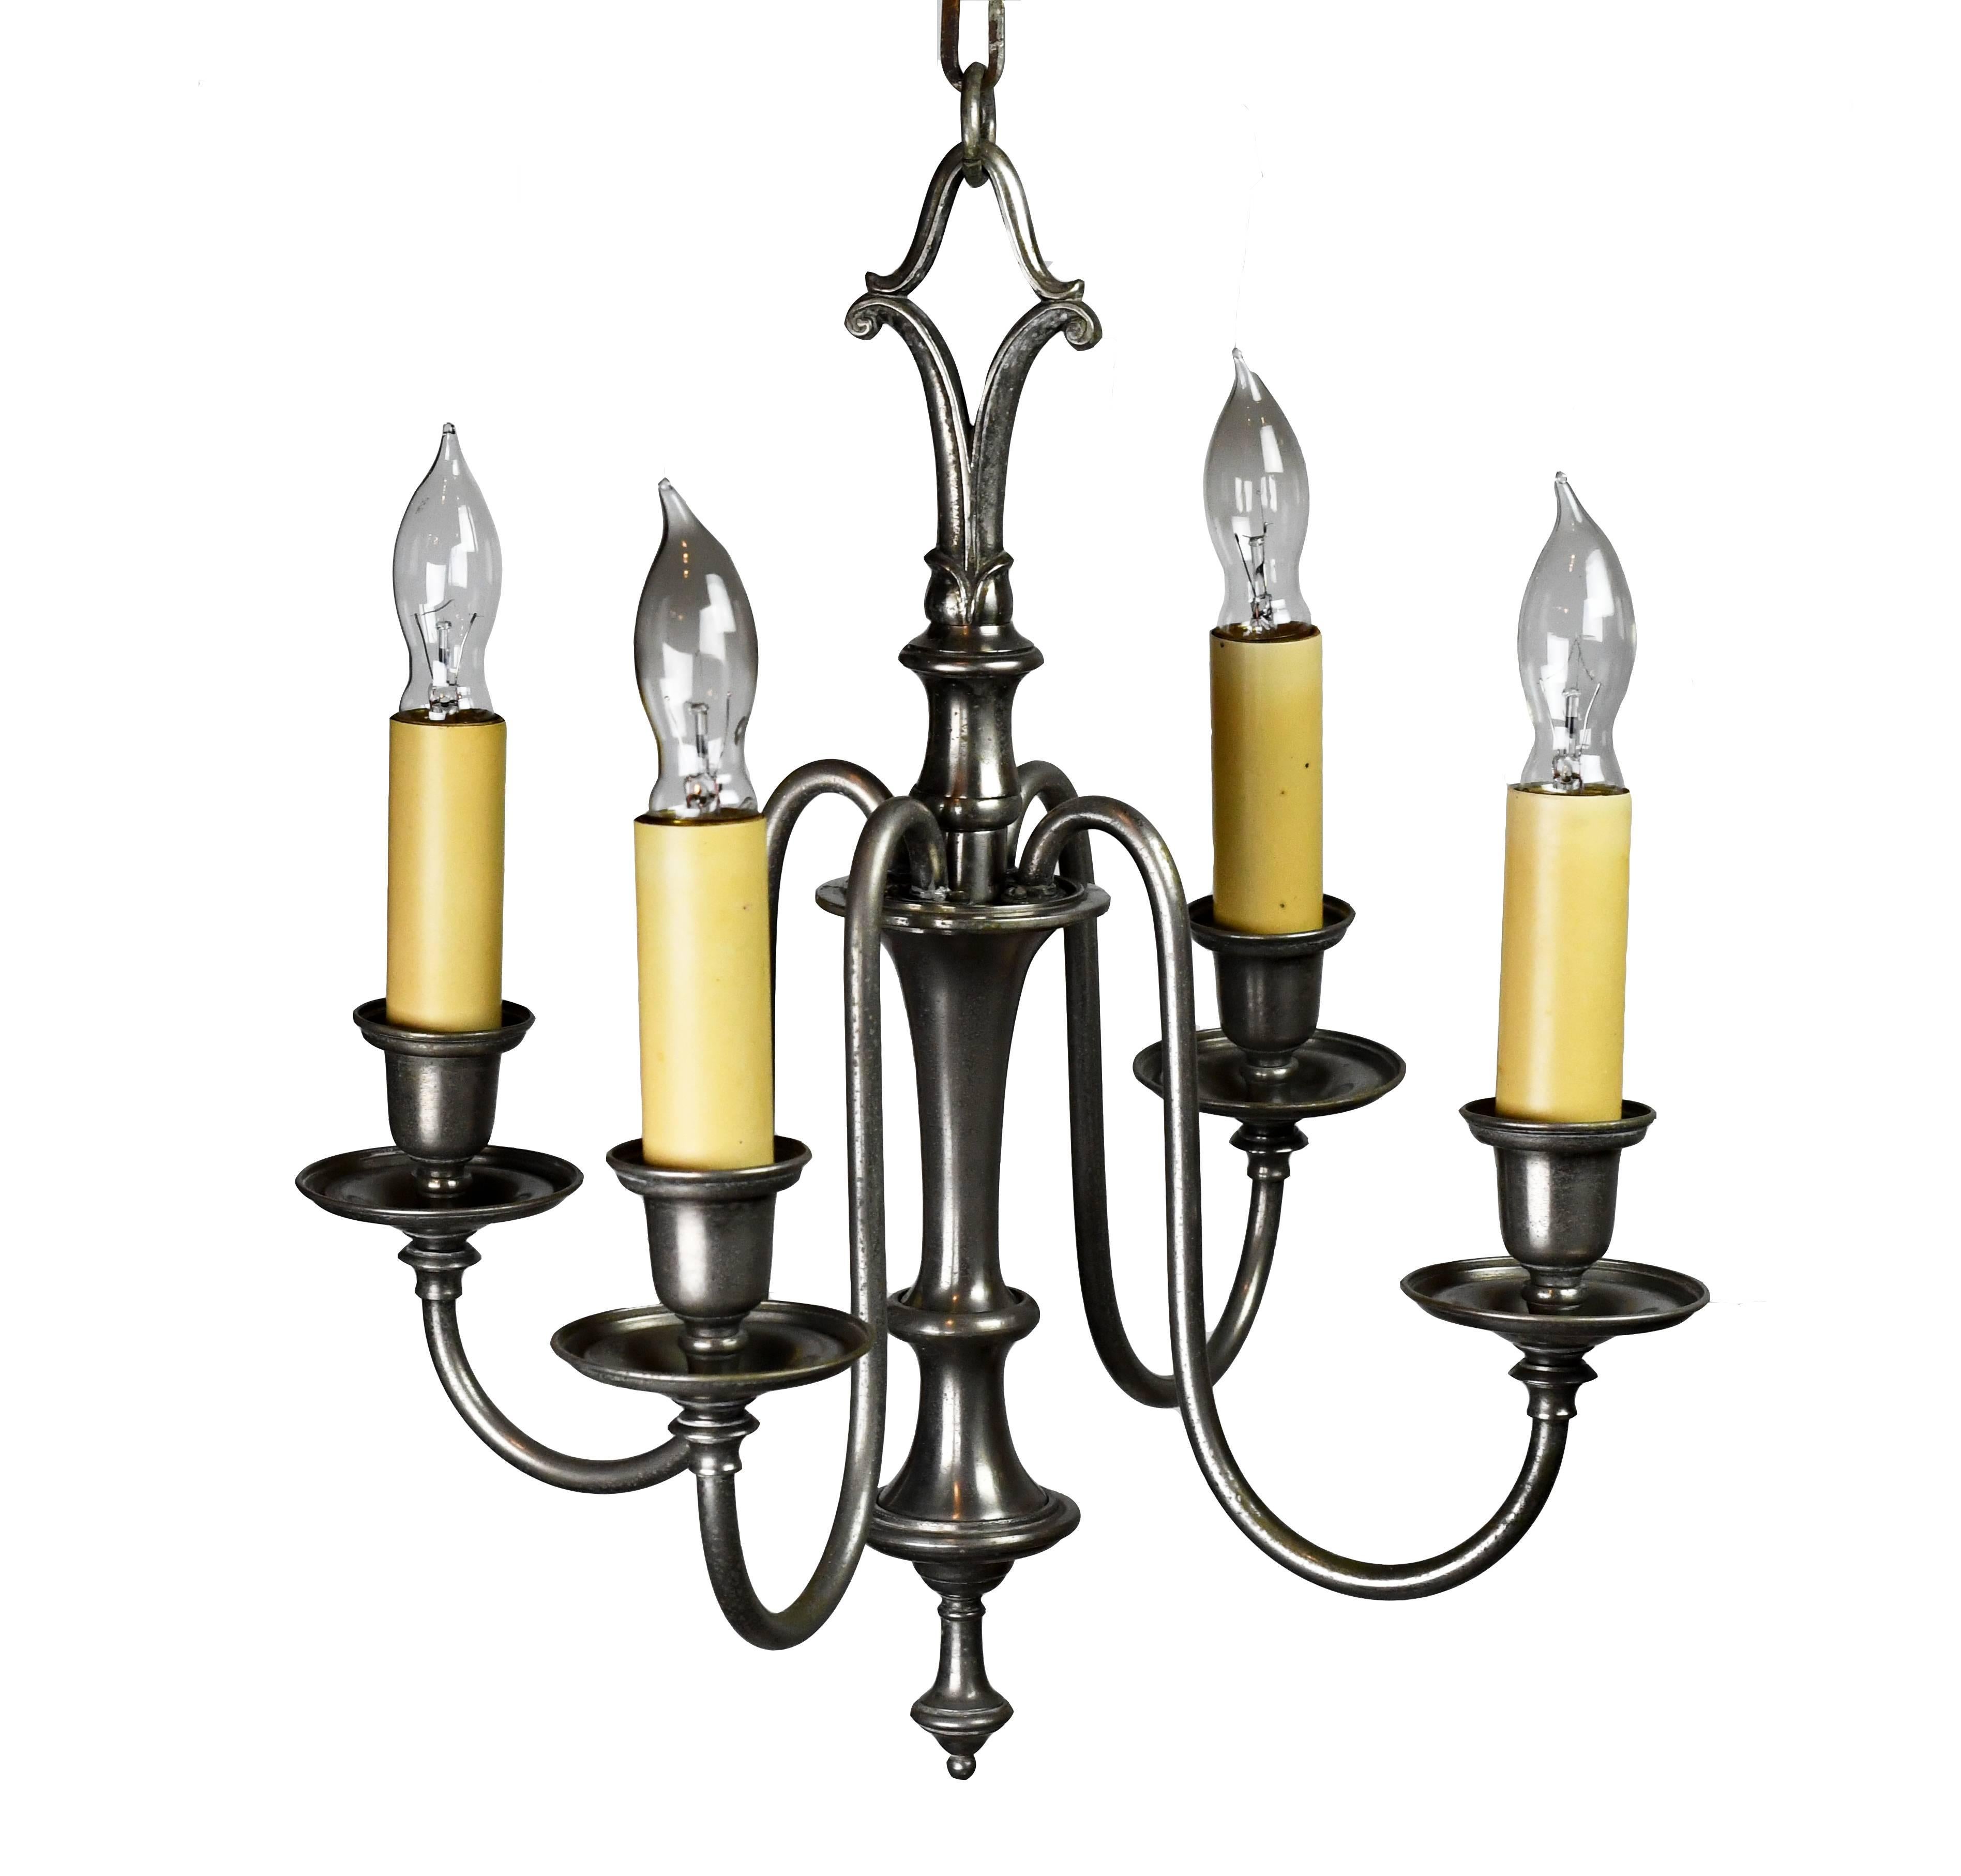 This Bradley & Hubbard silver plated four-arm sconce is simple in design, with four thin, curving arms, simple bottom finial, and subtly decorative chain loop. This chandelier's beautiful form and elegant, lovely design would make it the perfect